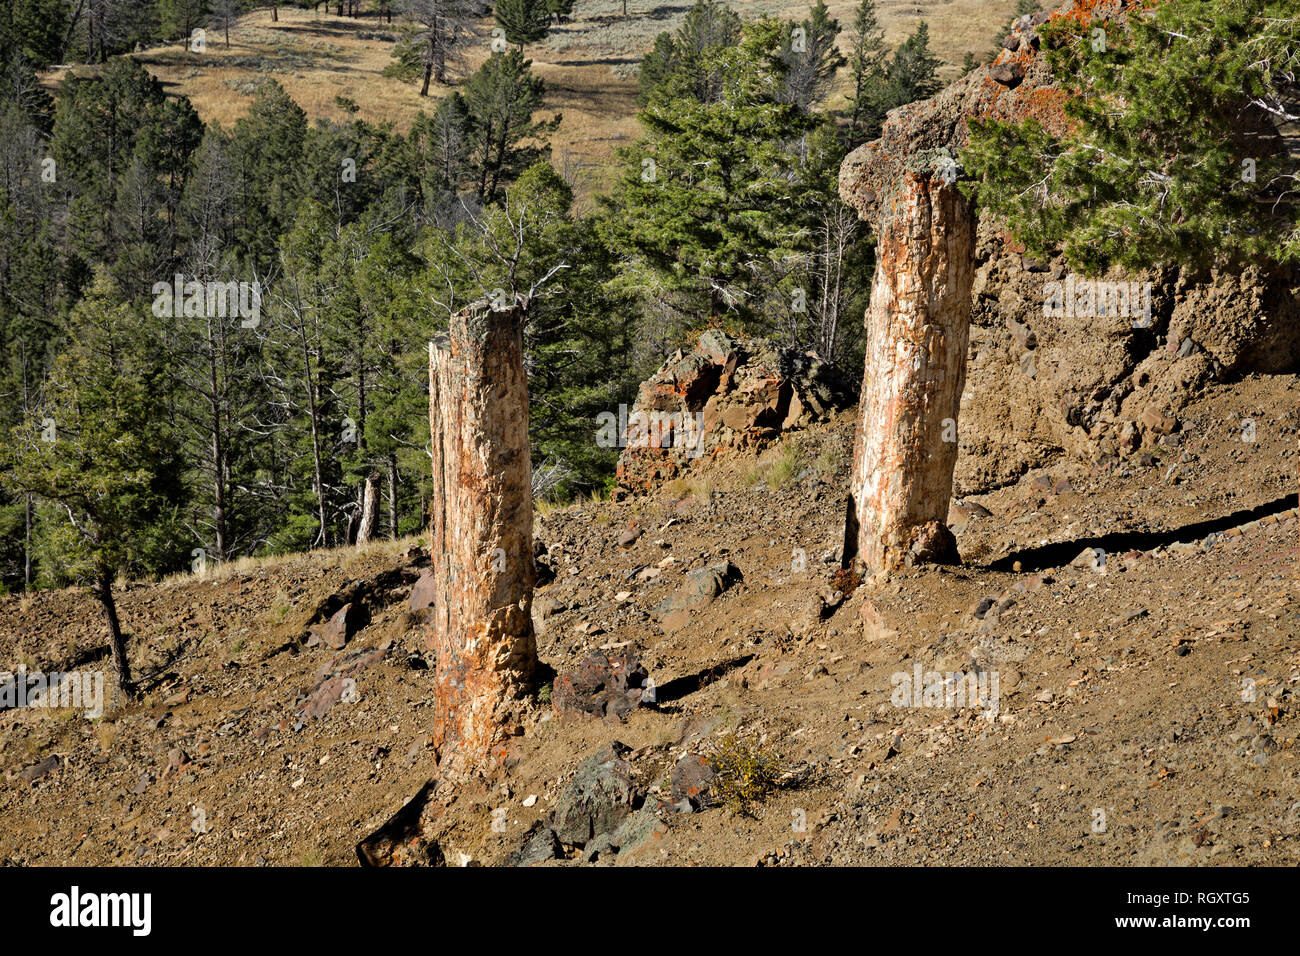 WY03085-00...WYOMING - The trunks two trees in the ancient petrified forest located on a shoulder of Speciman Ridge in Yellowstone National Park. Stock Photo